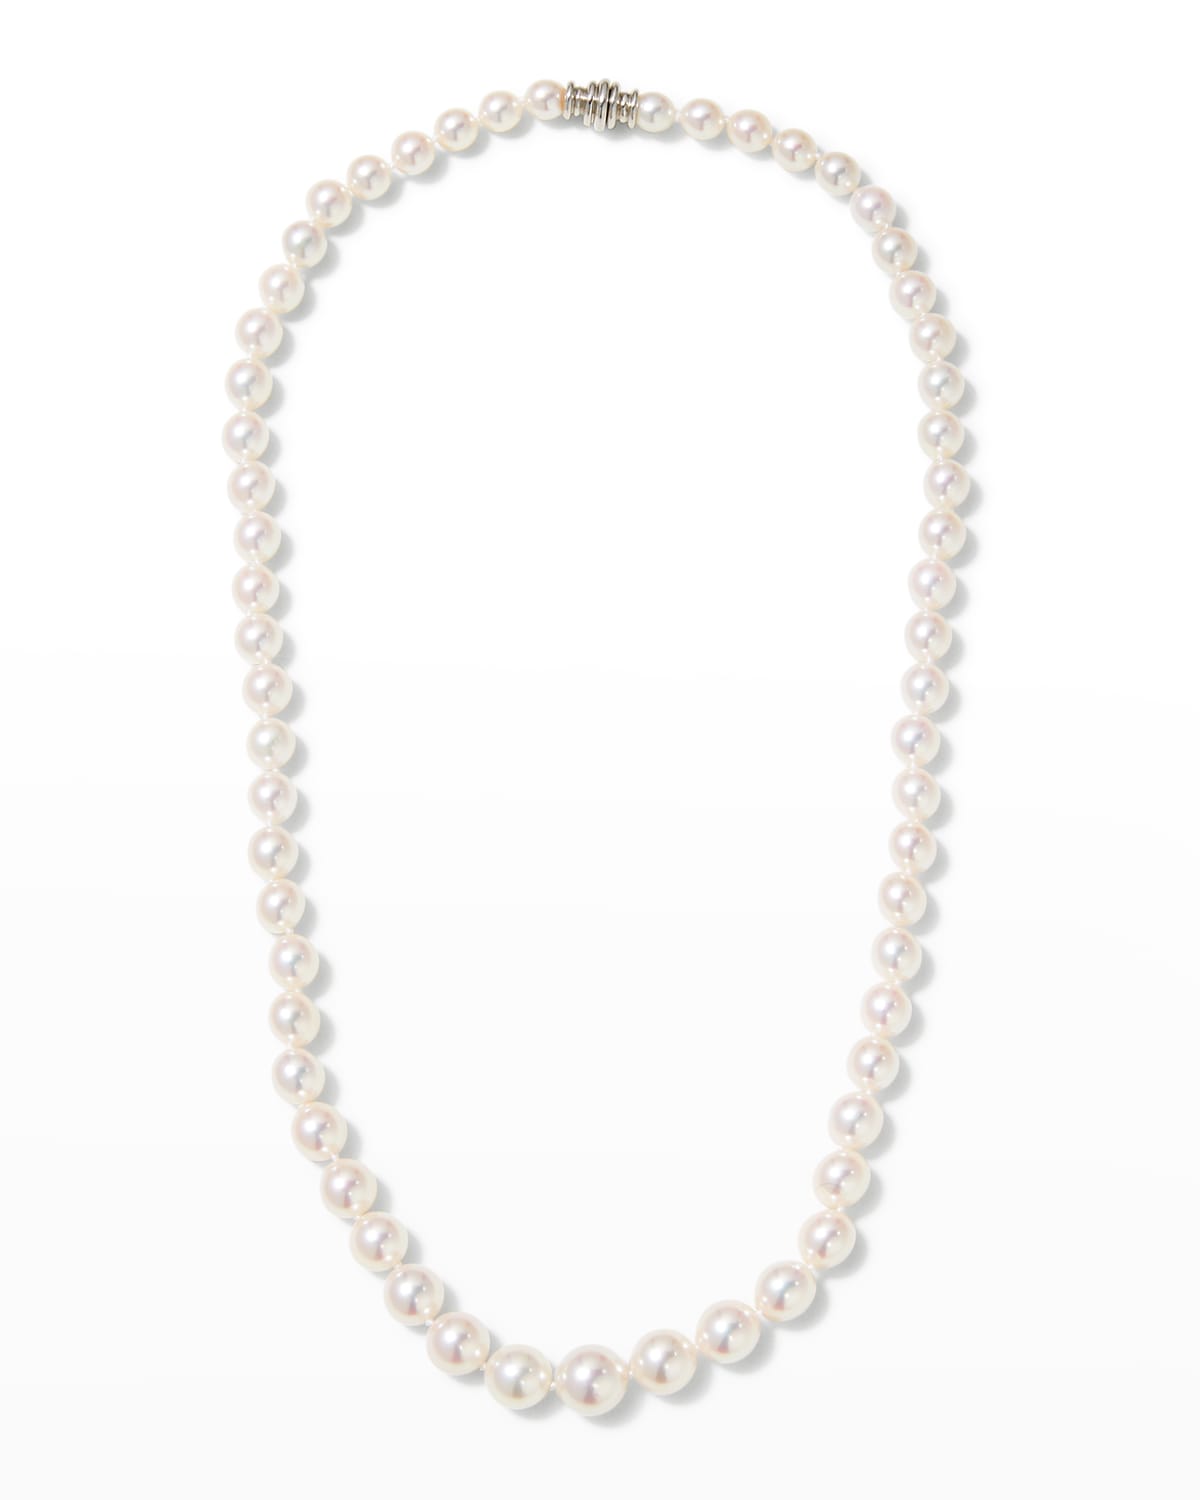 Assael 18" Akoya Cultured Graduated 6.5-9.5mm Pearl Necklace with White Gold Clasp